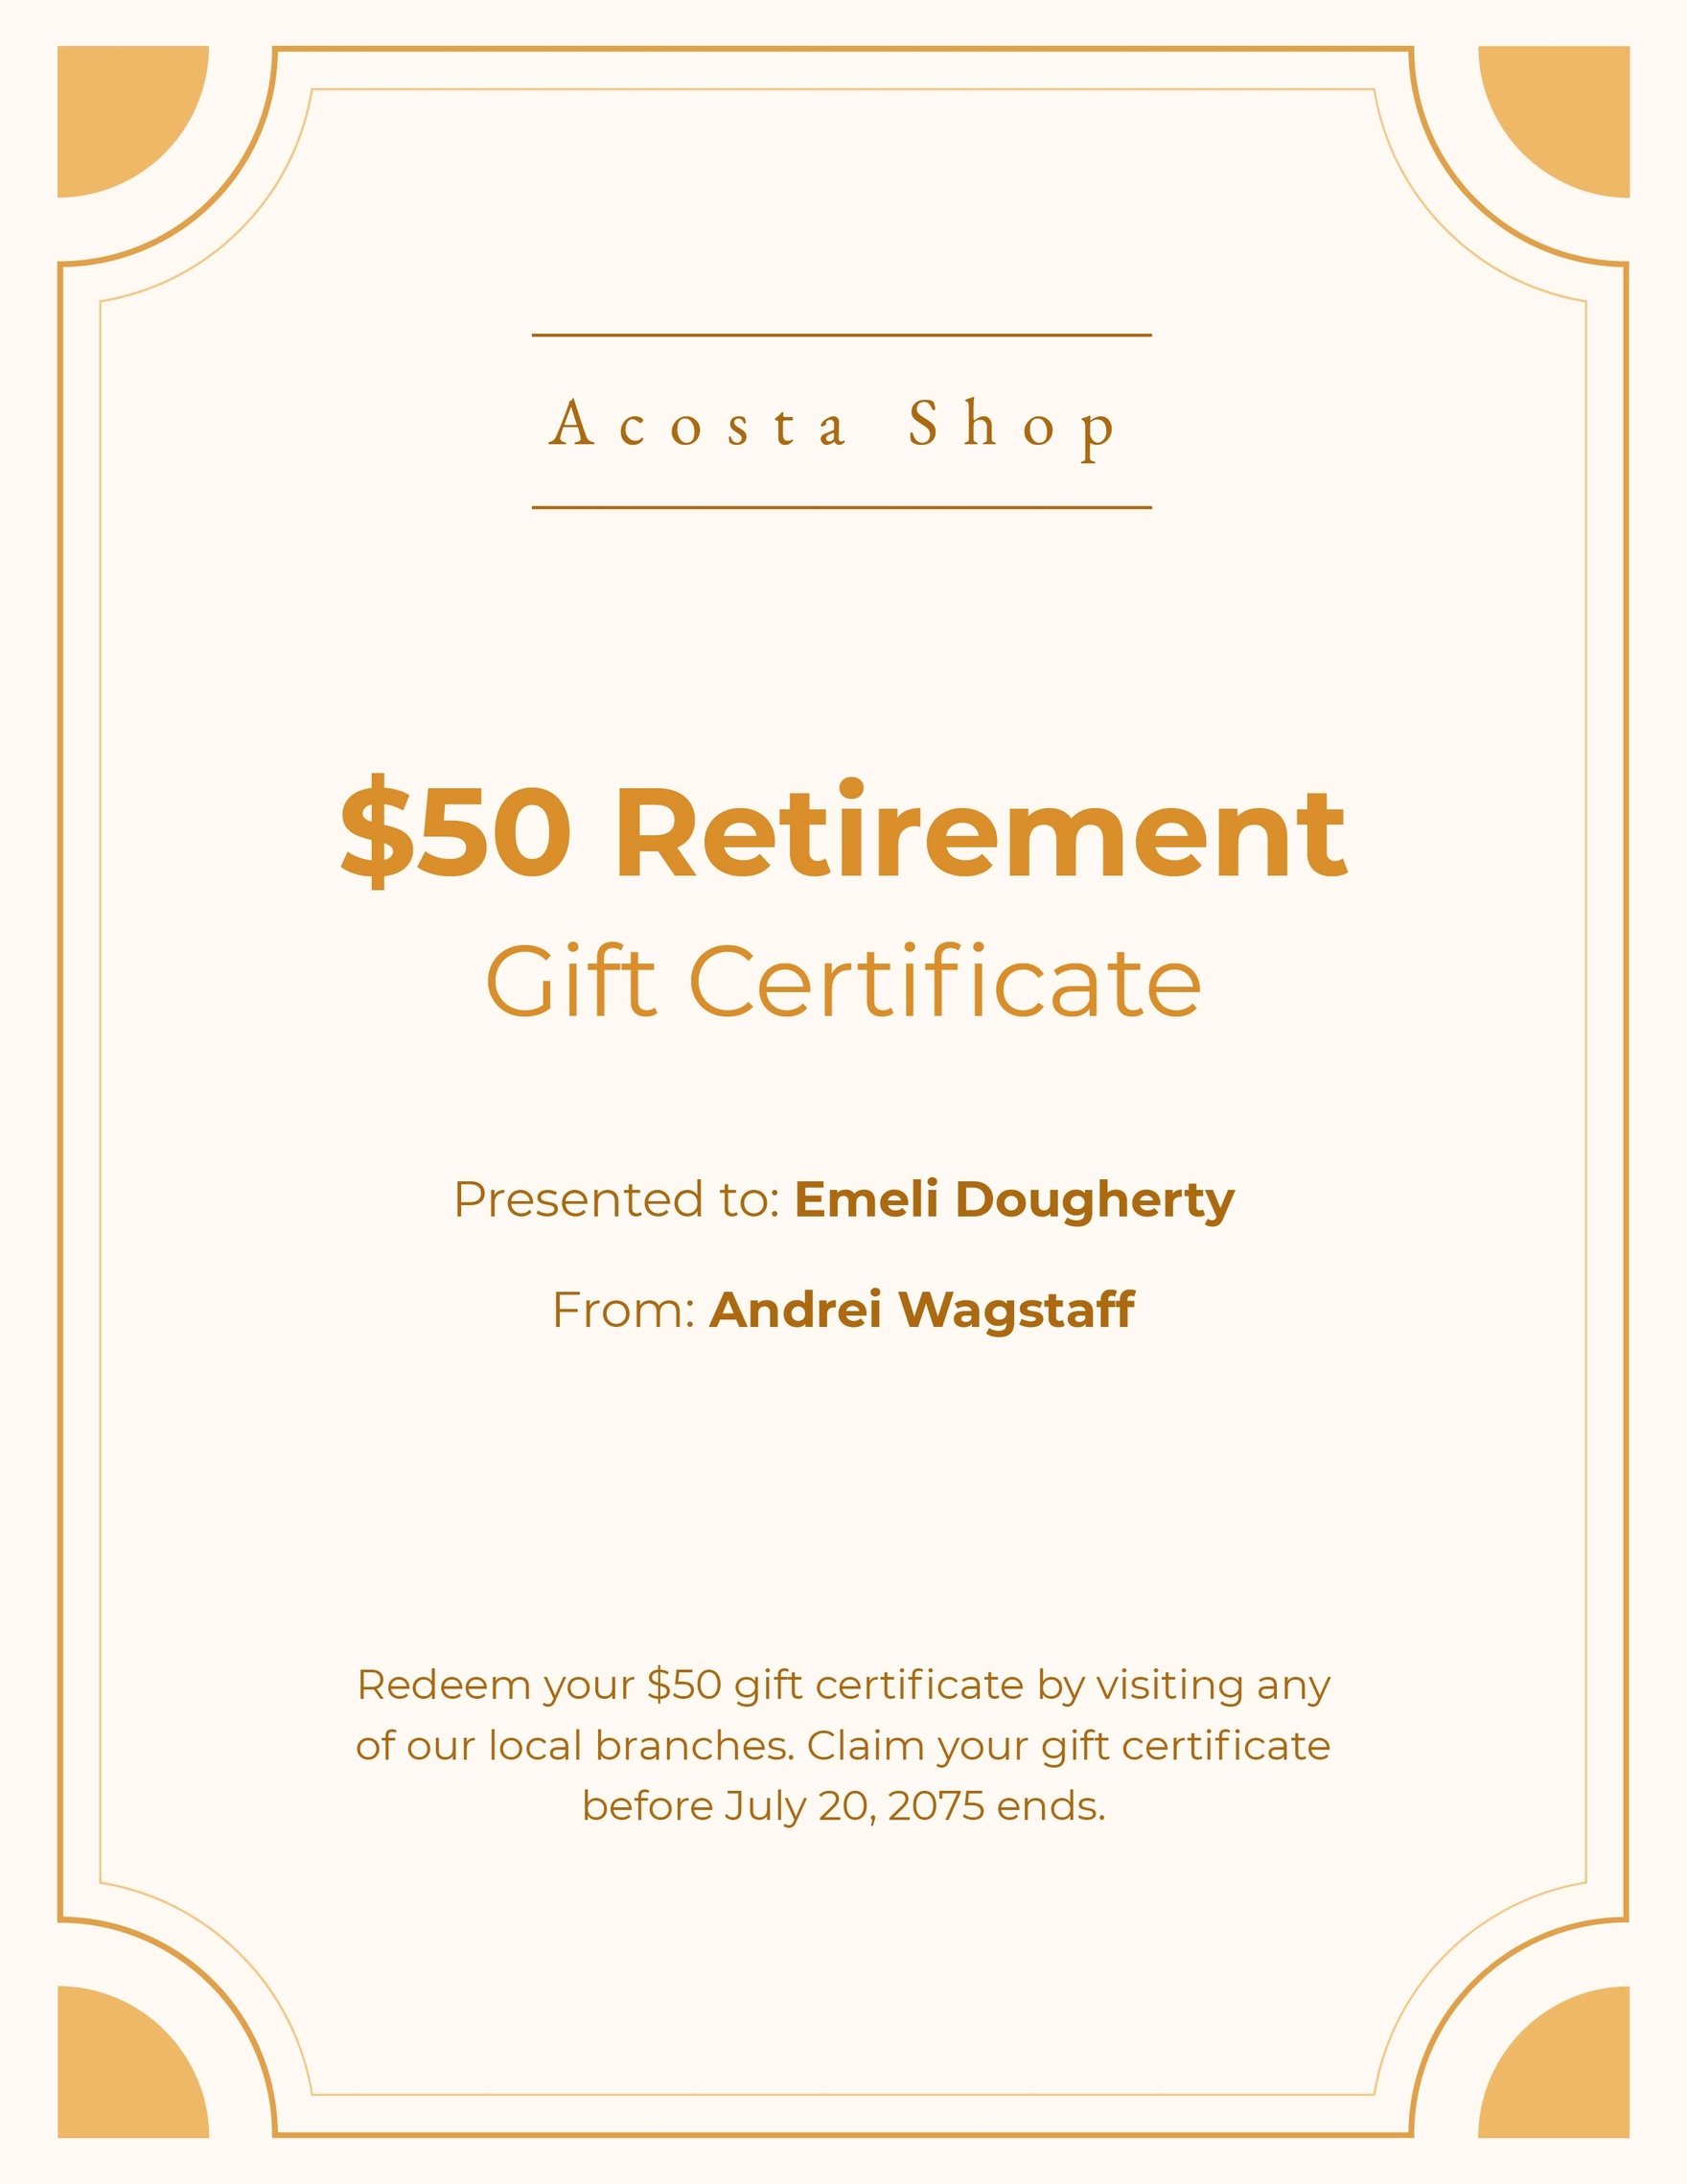 Free Sample Retirement Gift Certificate Template in Word, Illustrator, PSD, Apple Pages